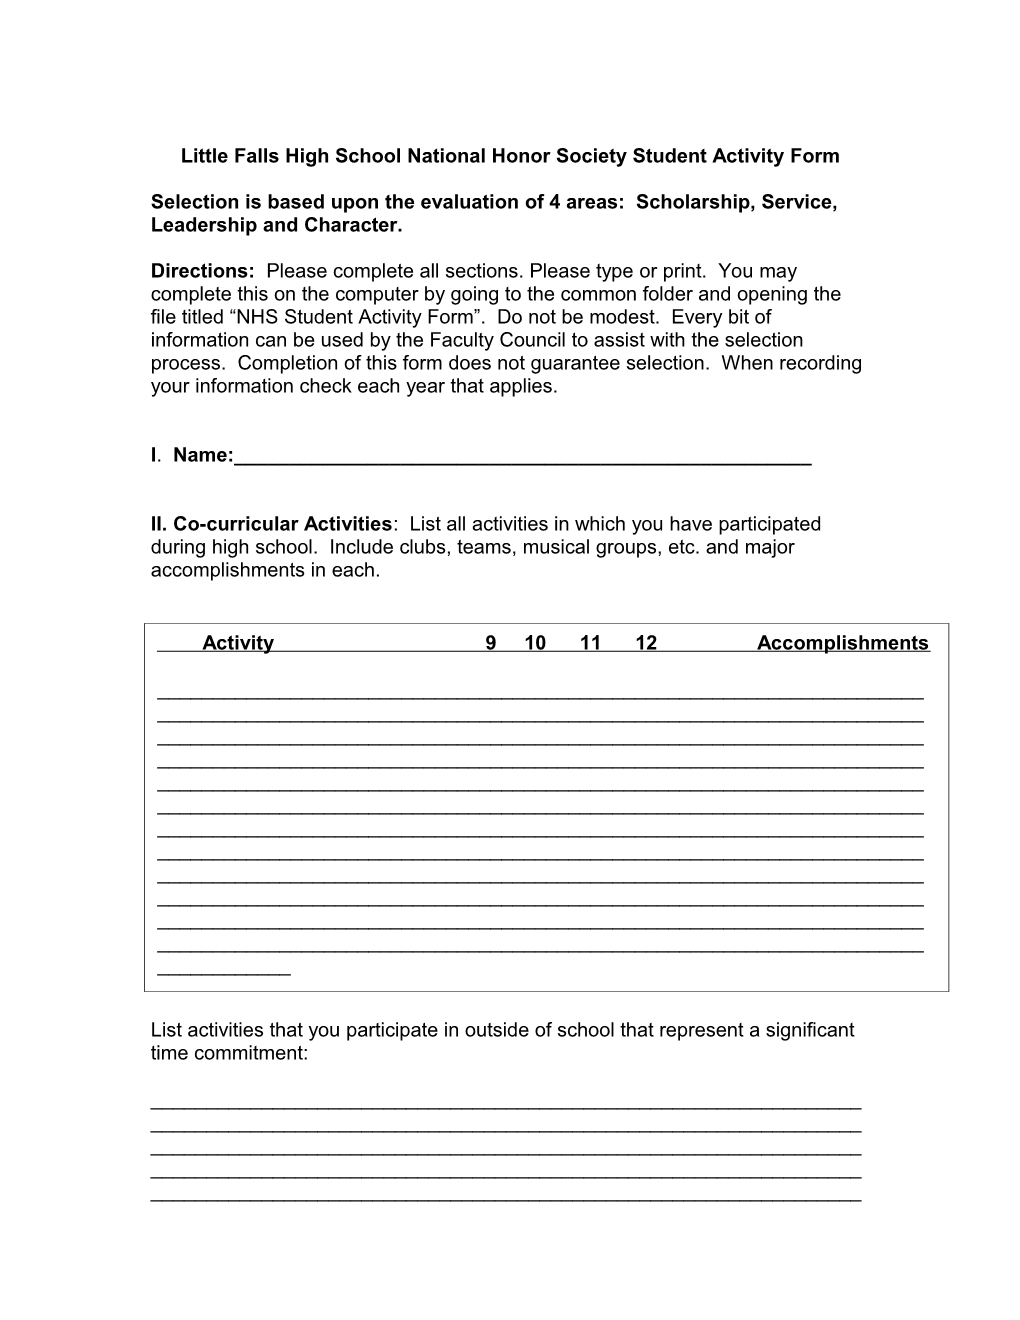 Little Falls High School National Honor Society Student Activity Form